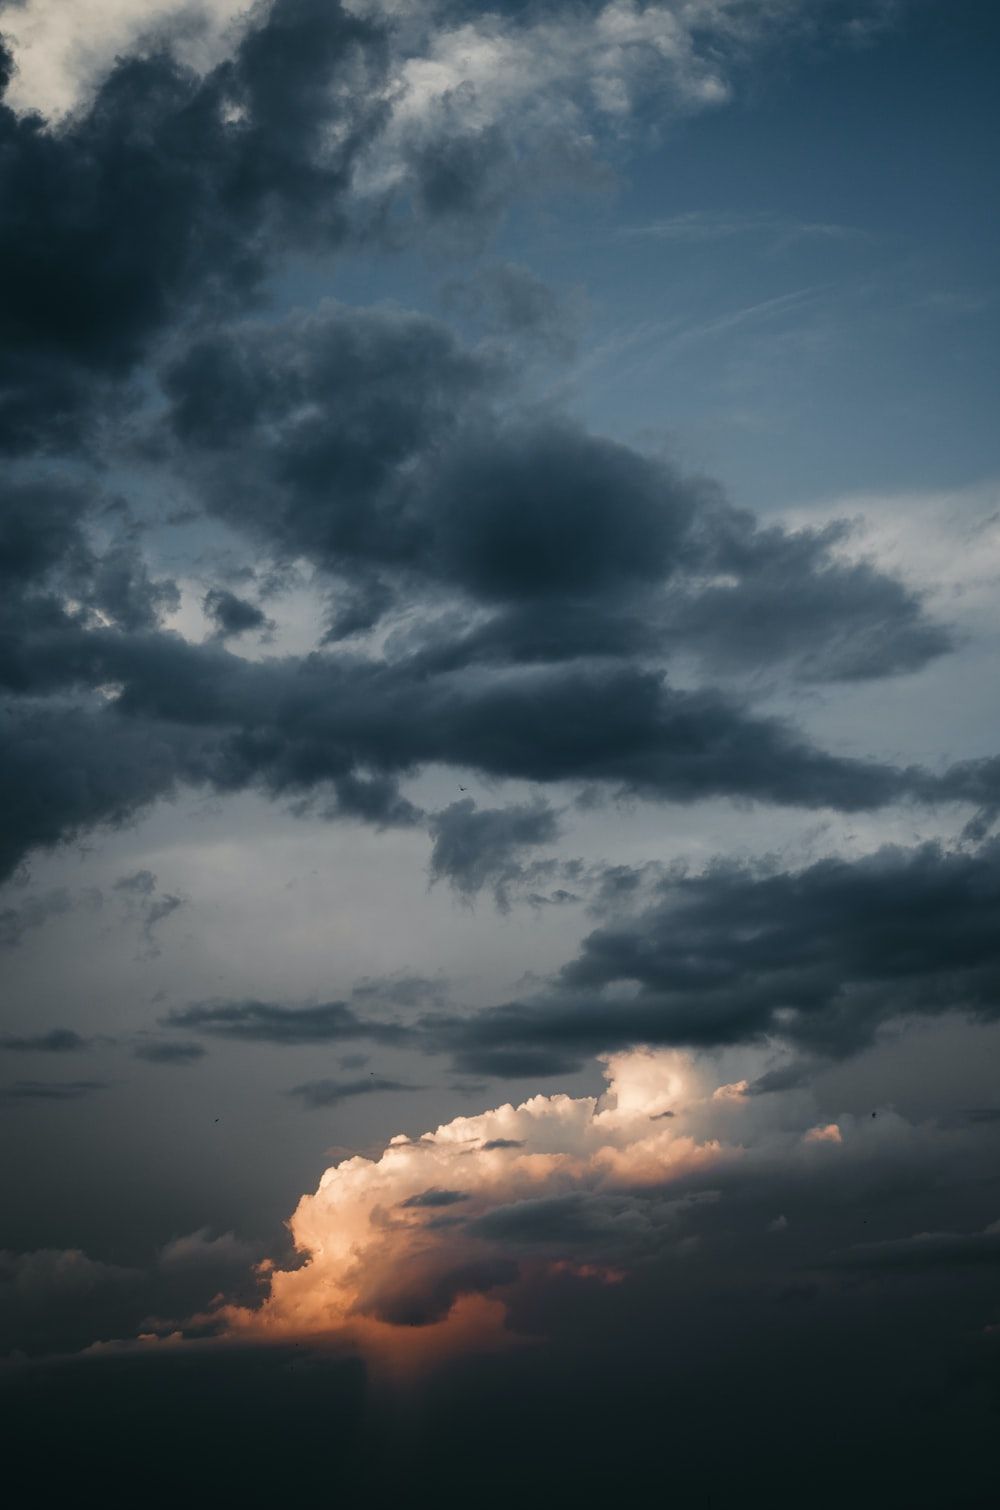 Rainy Sky Picture. Download Free Image